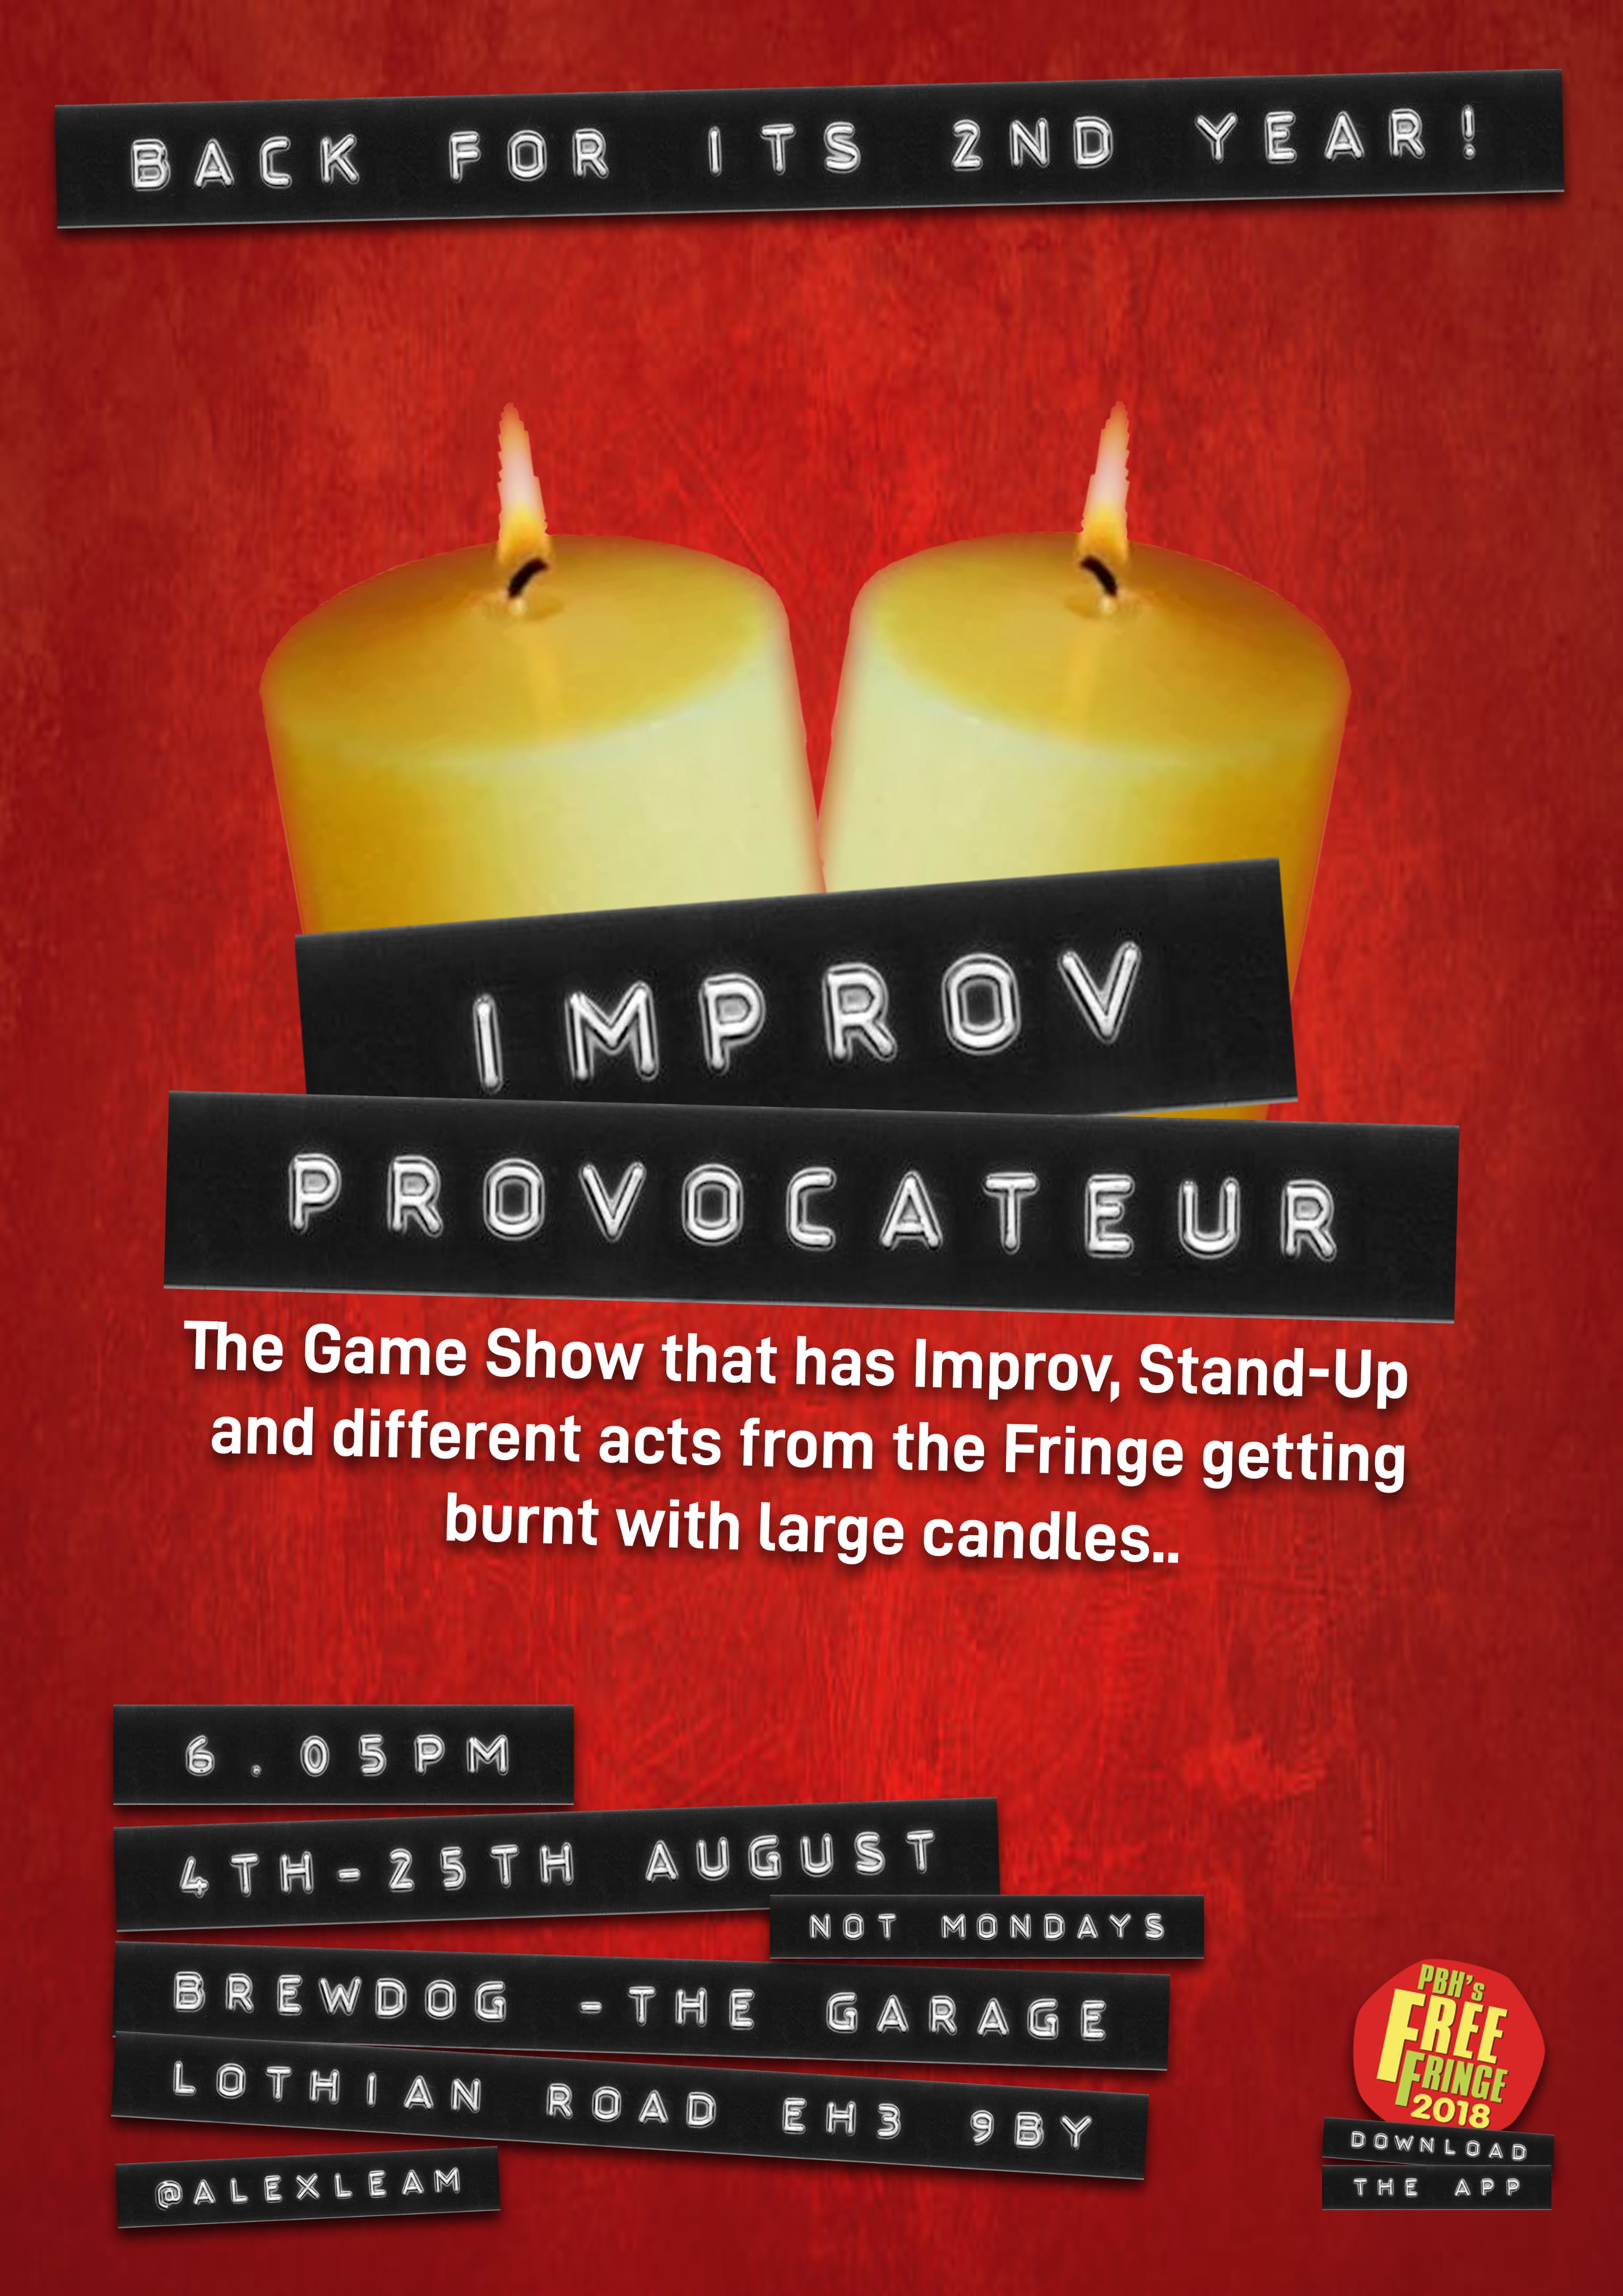 The poster for Improv Provocateur